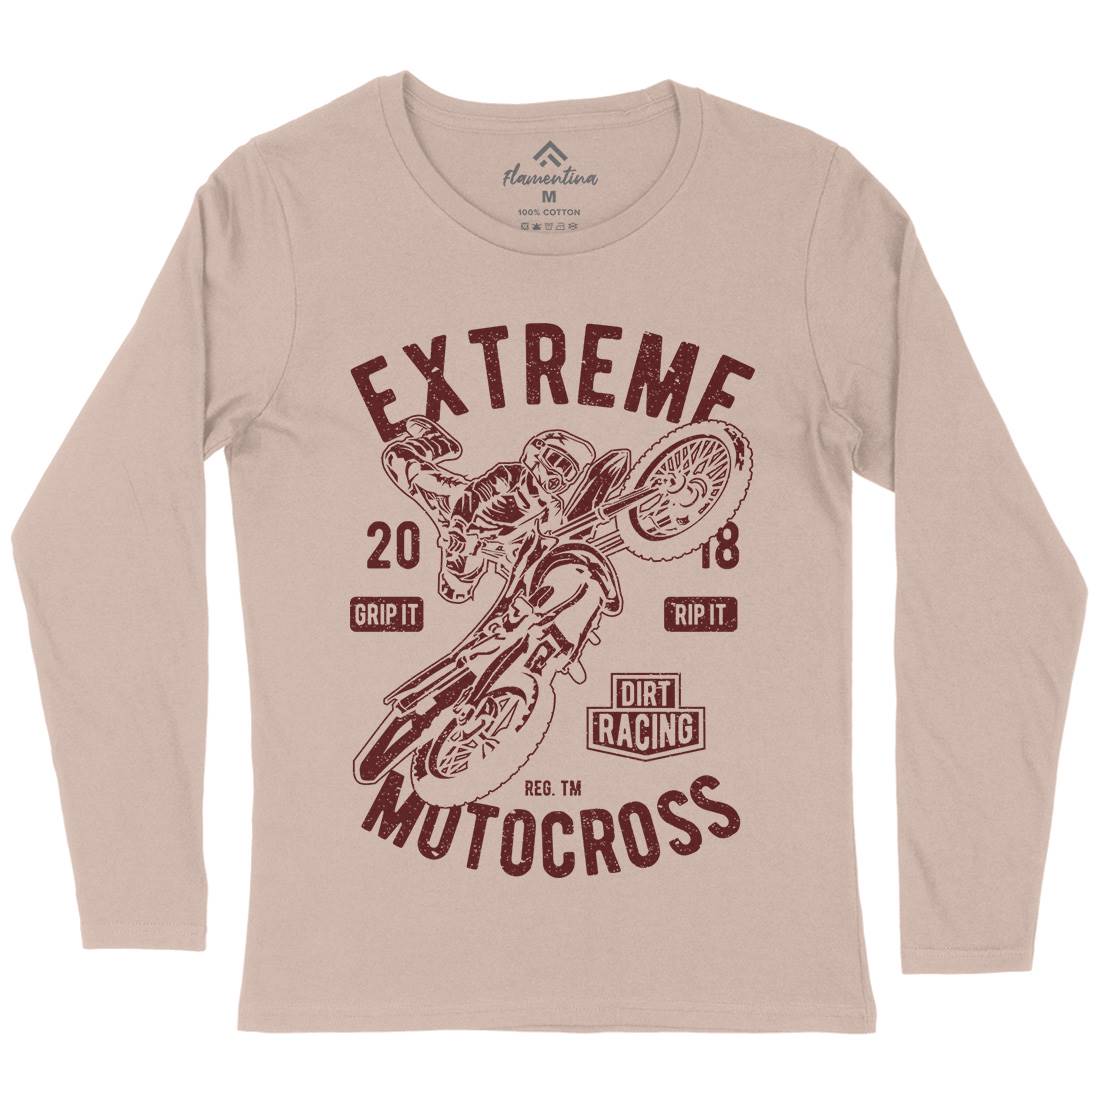 Extreme Motocross Womens Long Sleeve T-Shirt Motorcycles A651